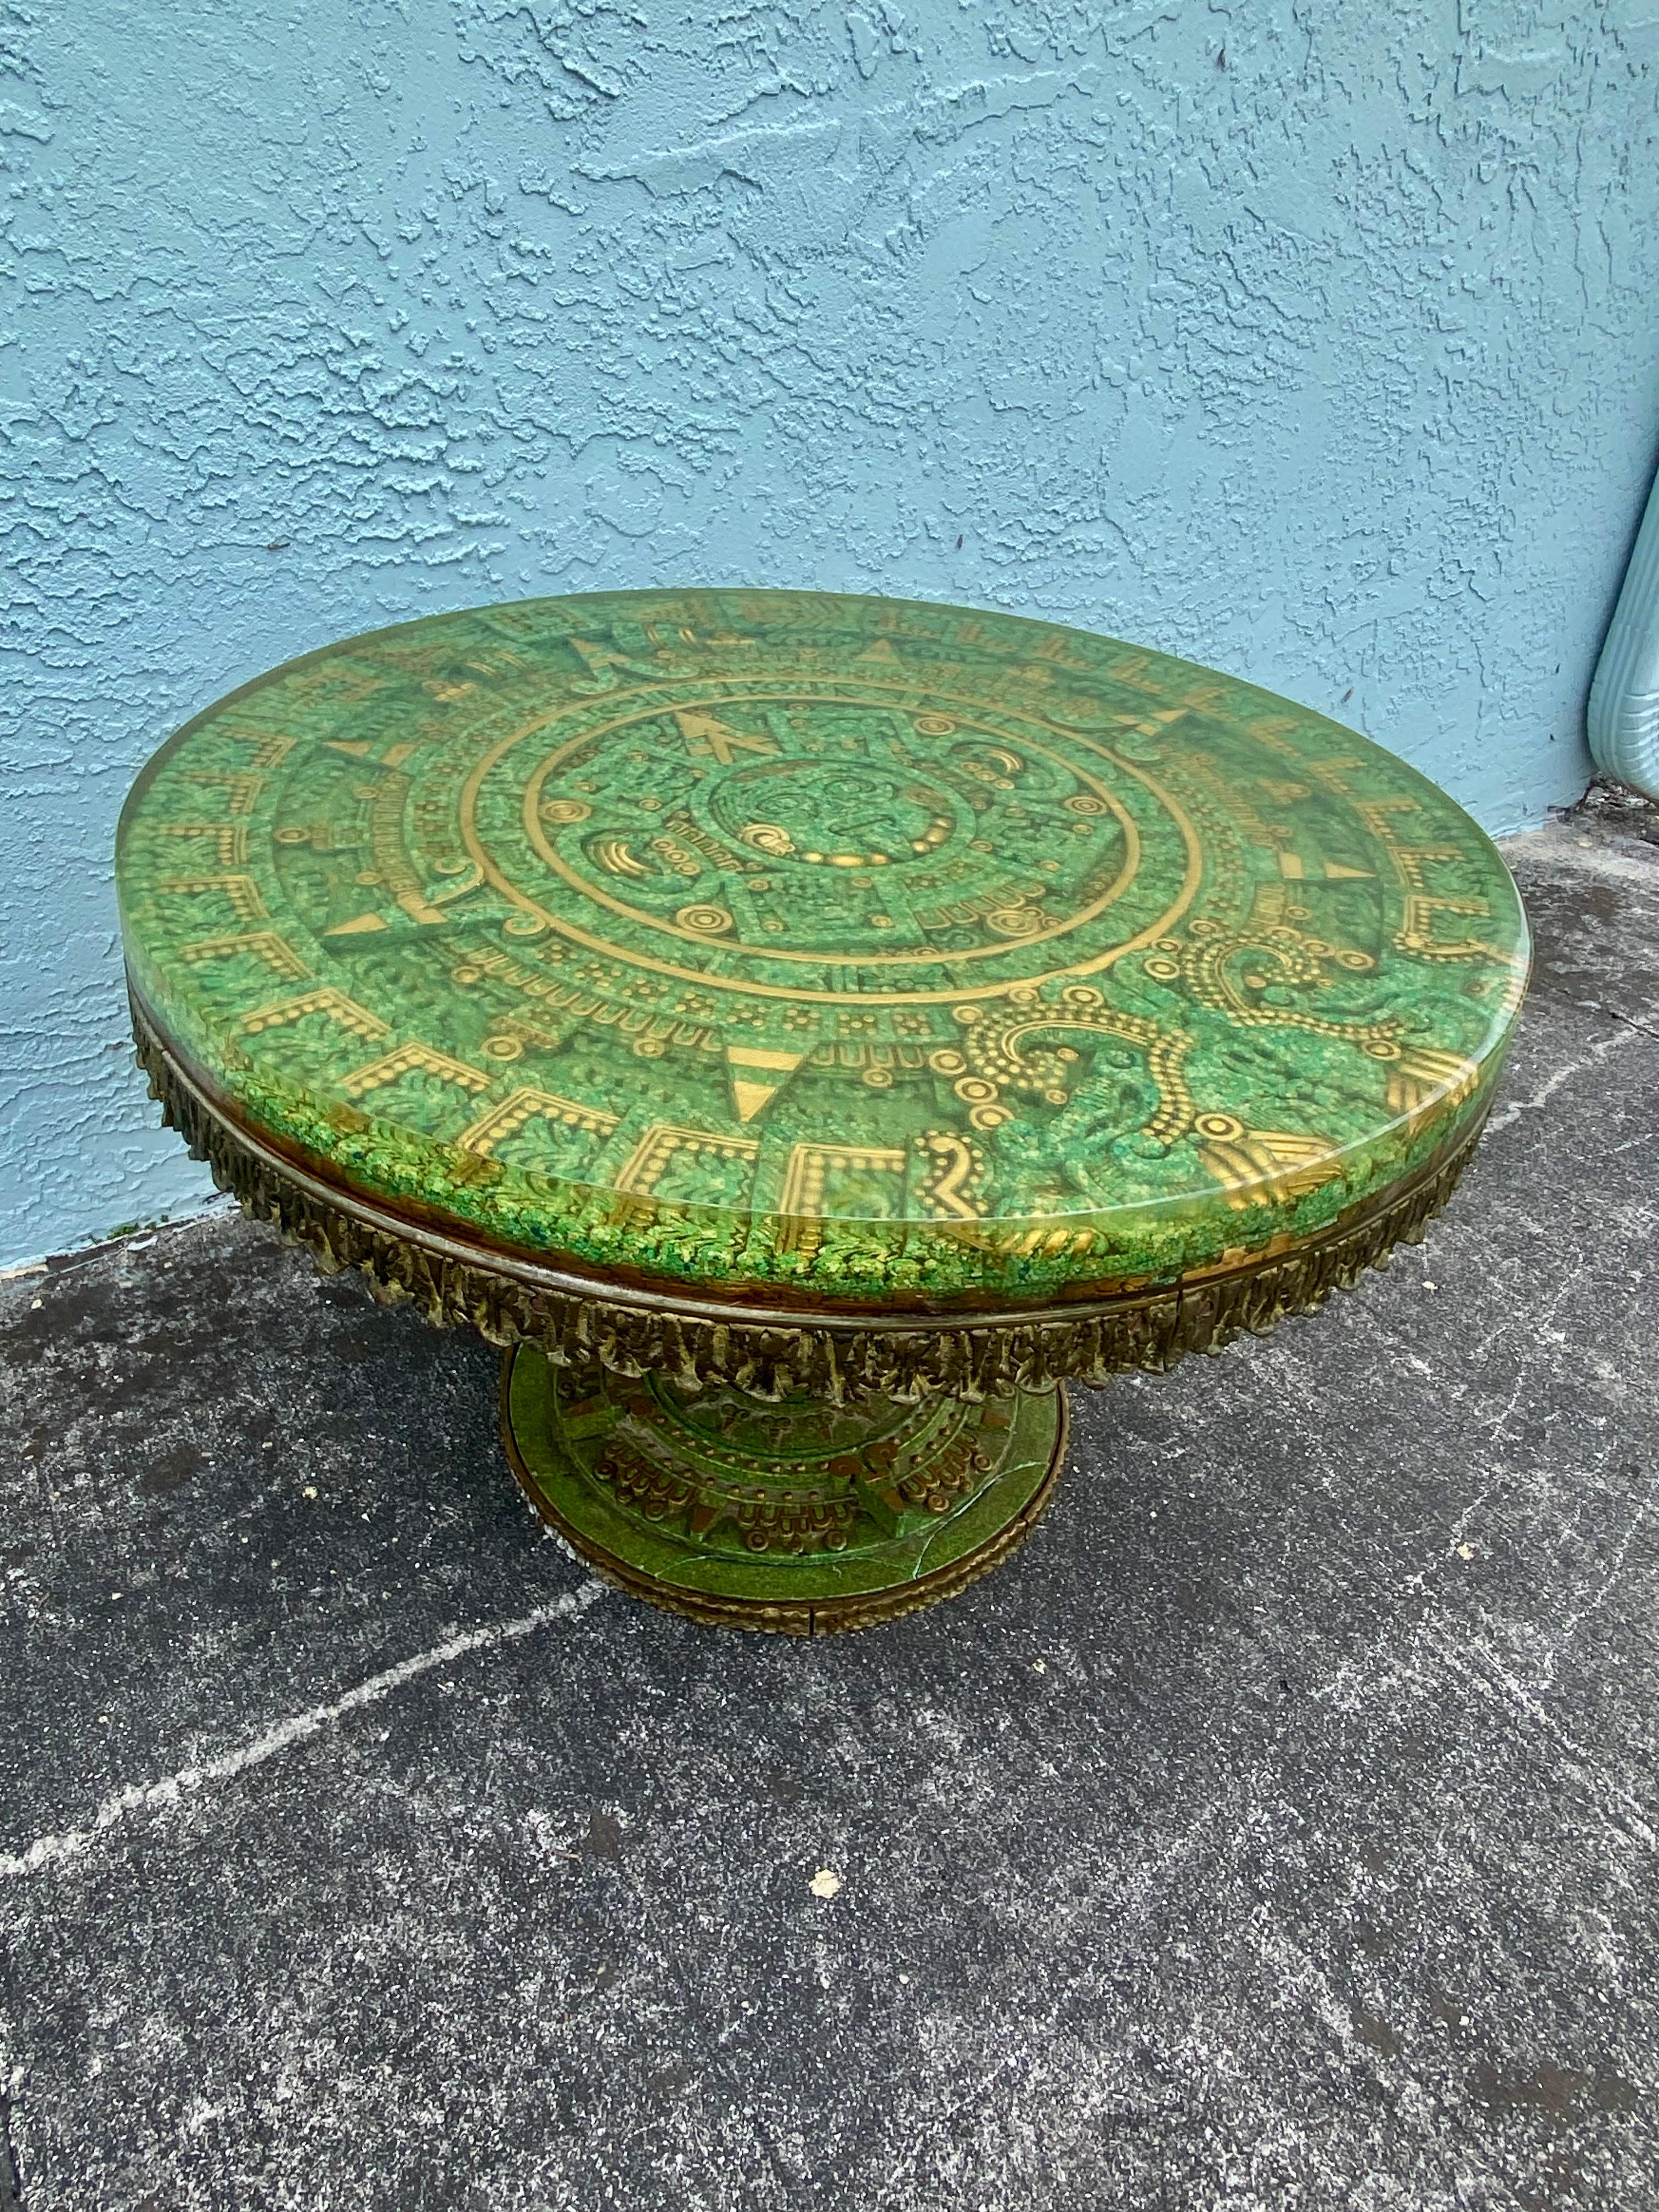 Sculpted Inlay Malachite Brutalist Bronze Wood Stone Resin Aztec Circular Table  For Sale 41